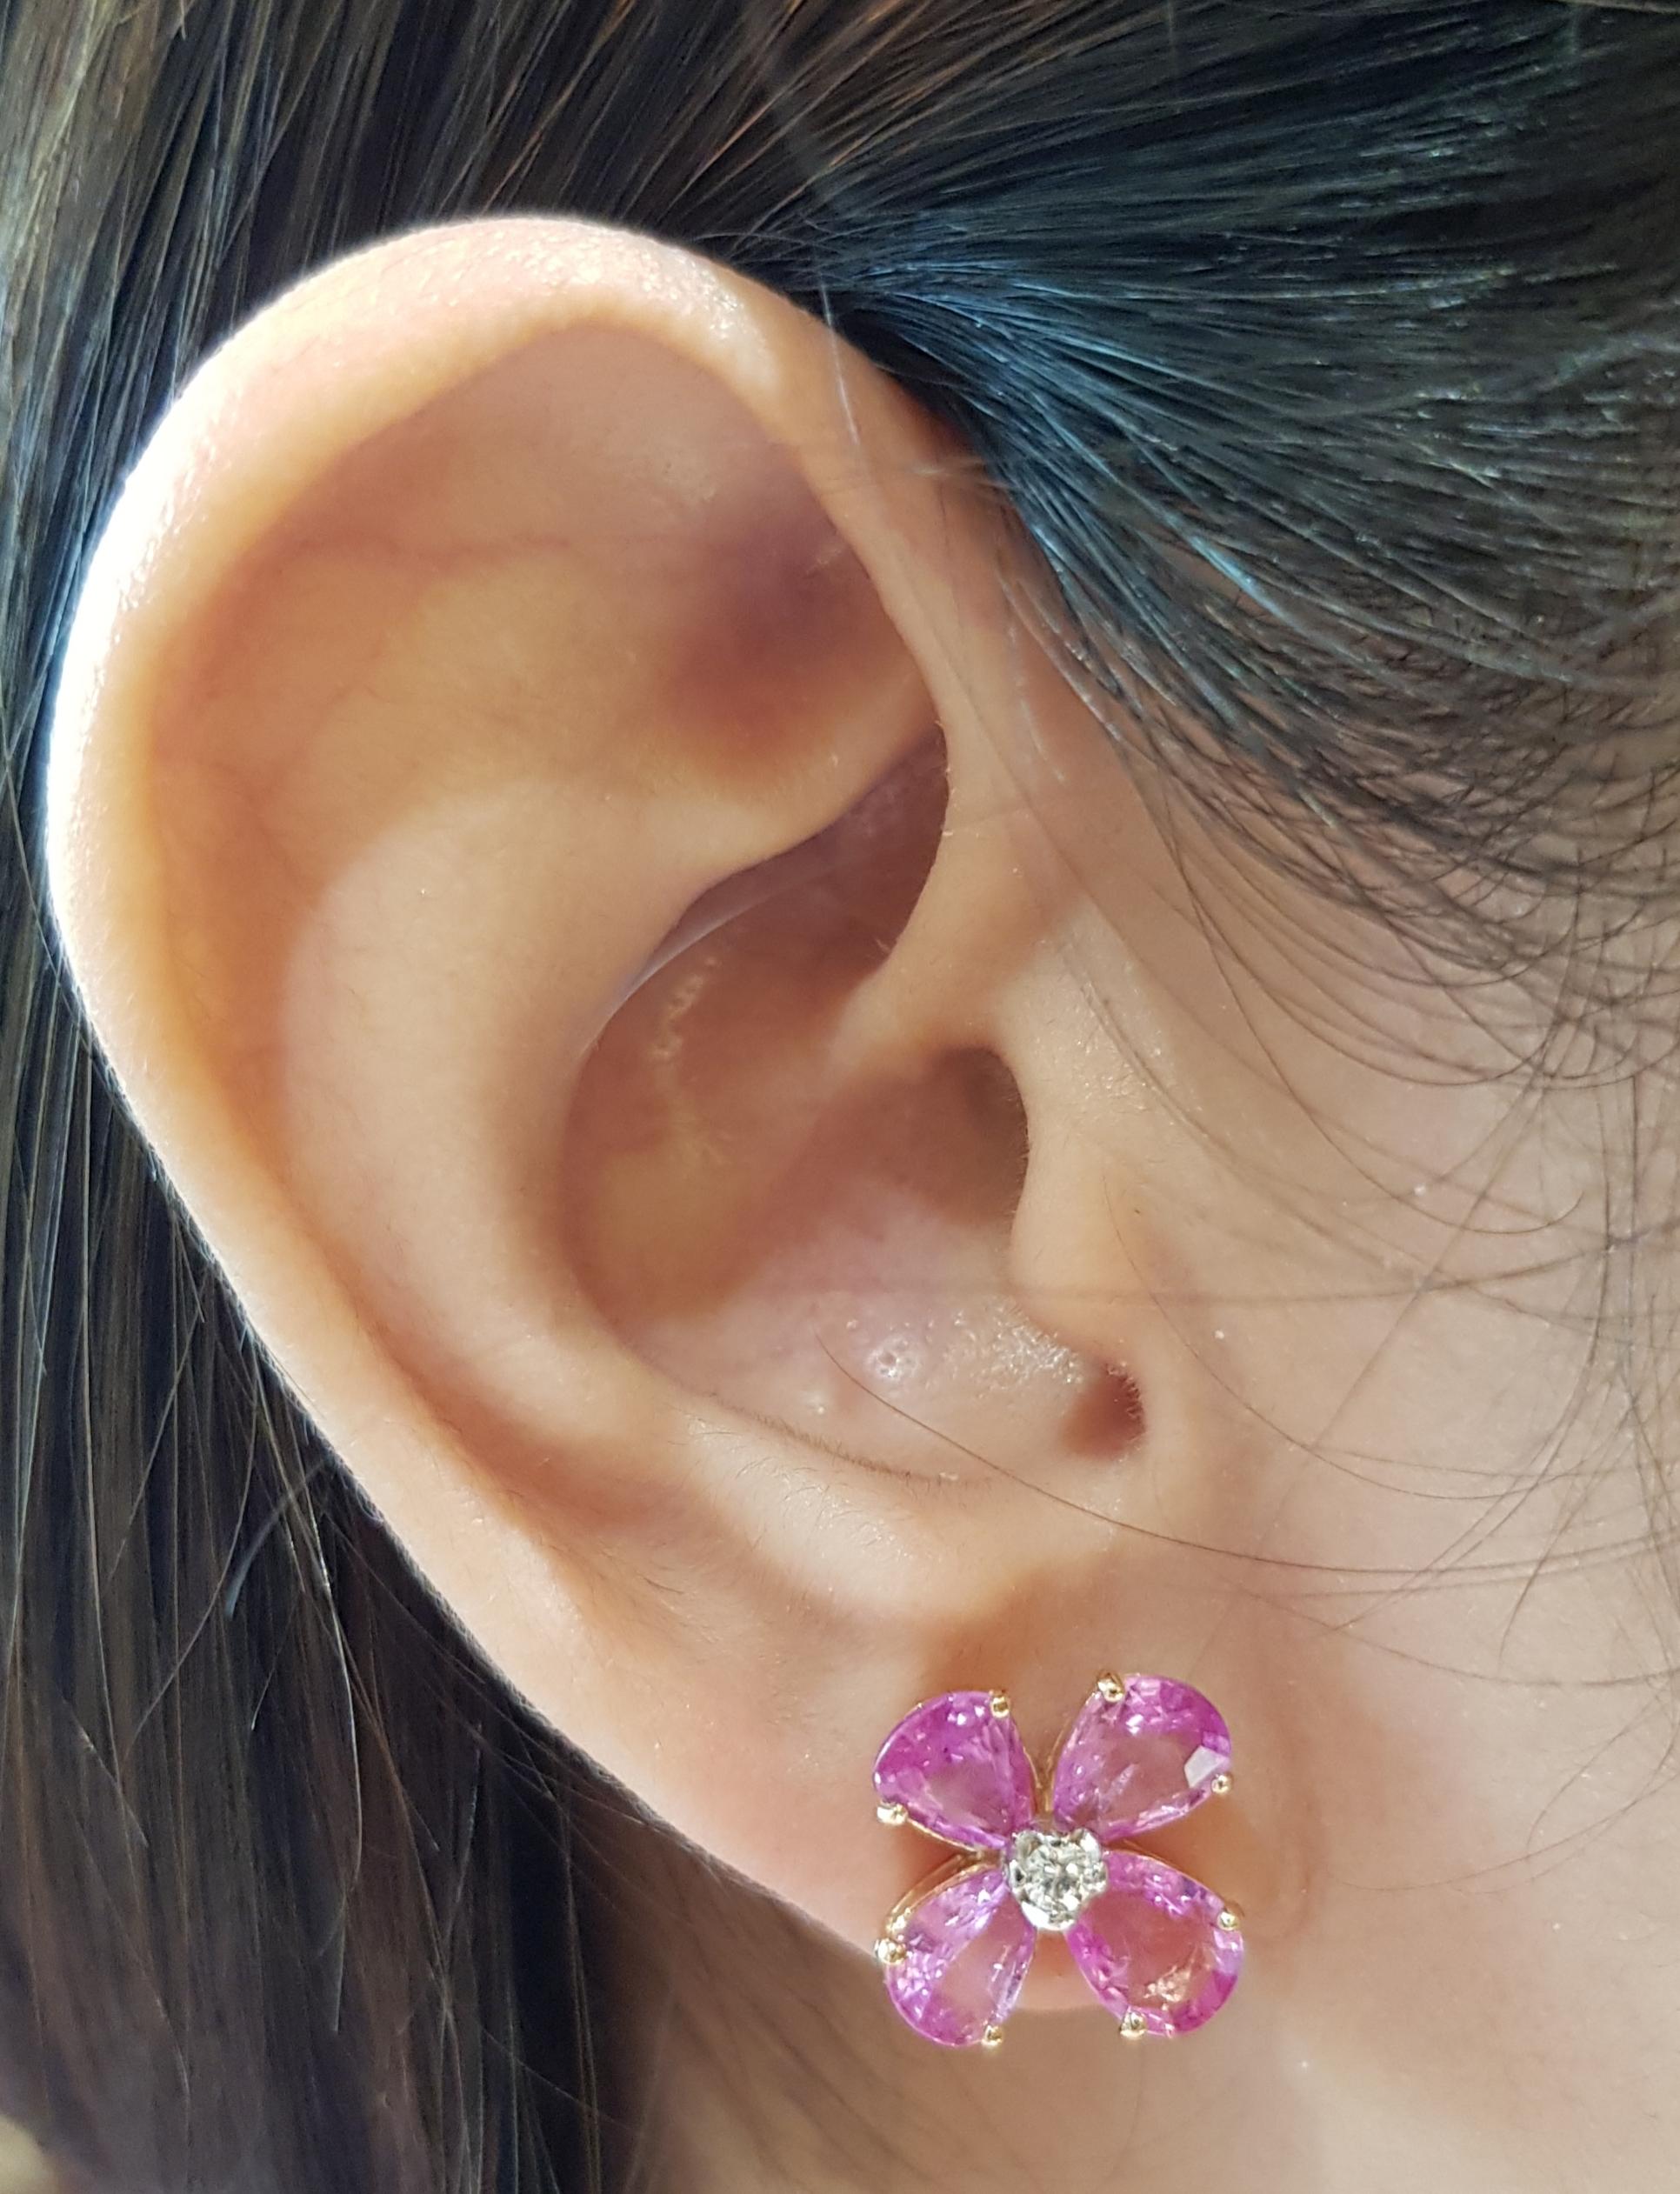 Pink Sapphire 5.32 carats with Diamond 0.09 carat Earrings set in 18 Karat Rose Gold Settings

Width:  1.2 cm 
Length:  1.2 cm
Total Weight: 5.0 grams

